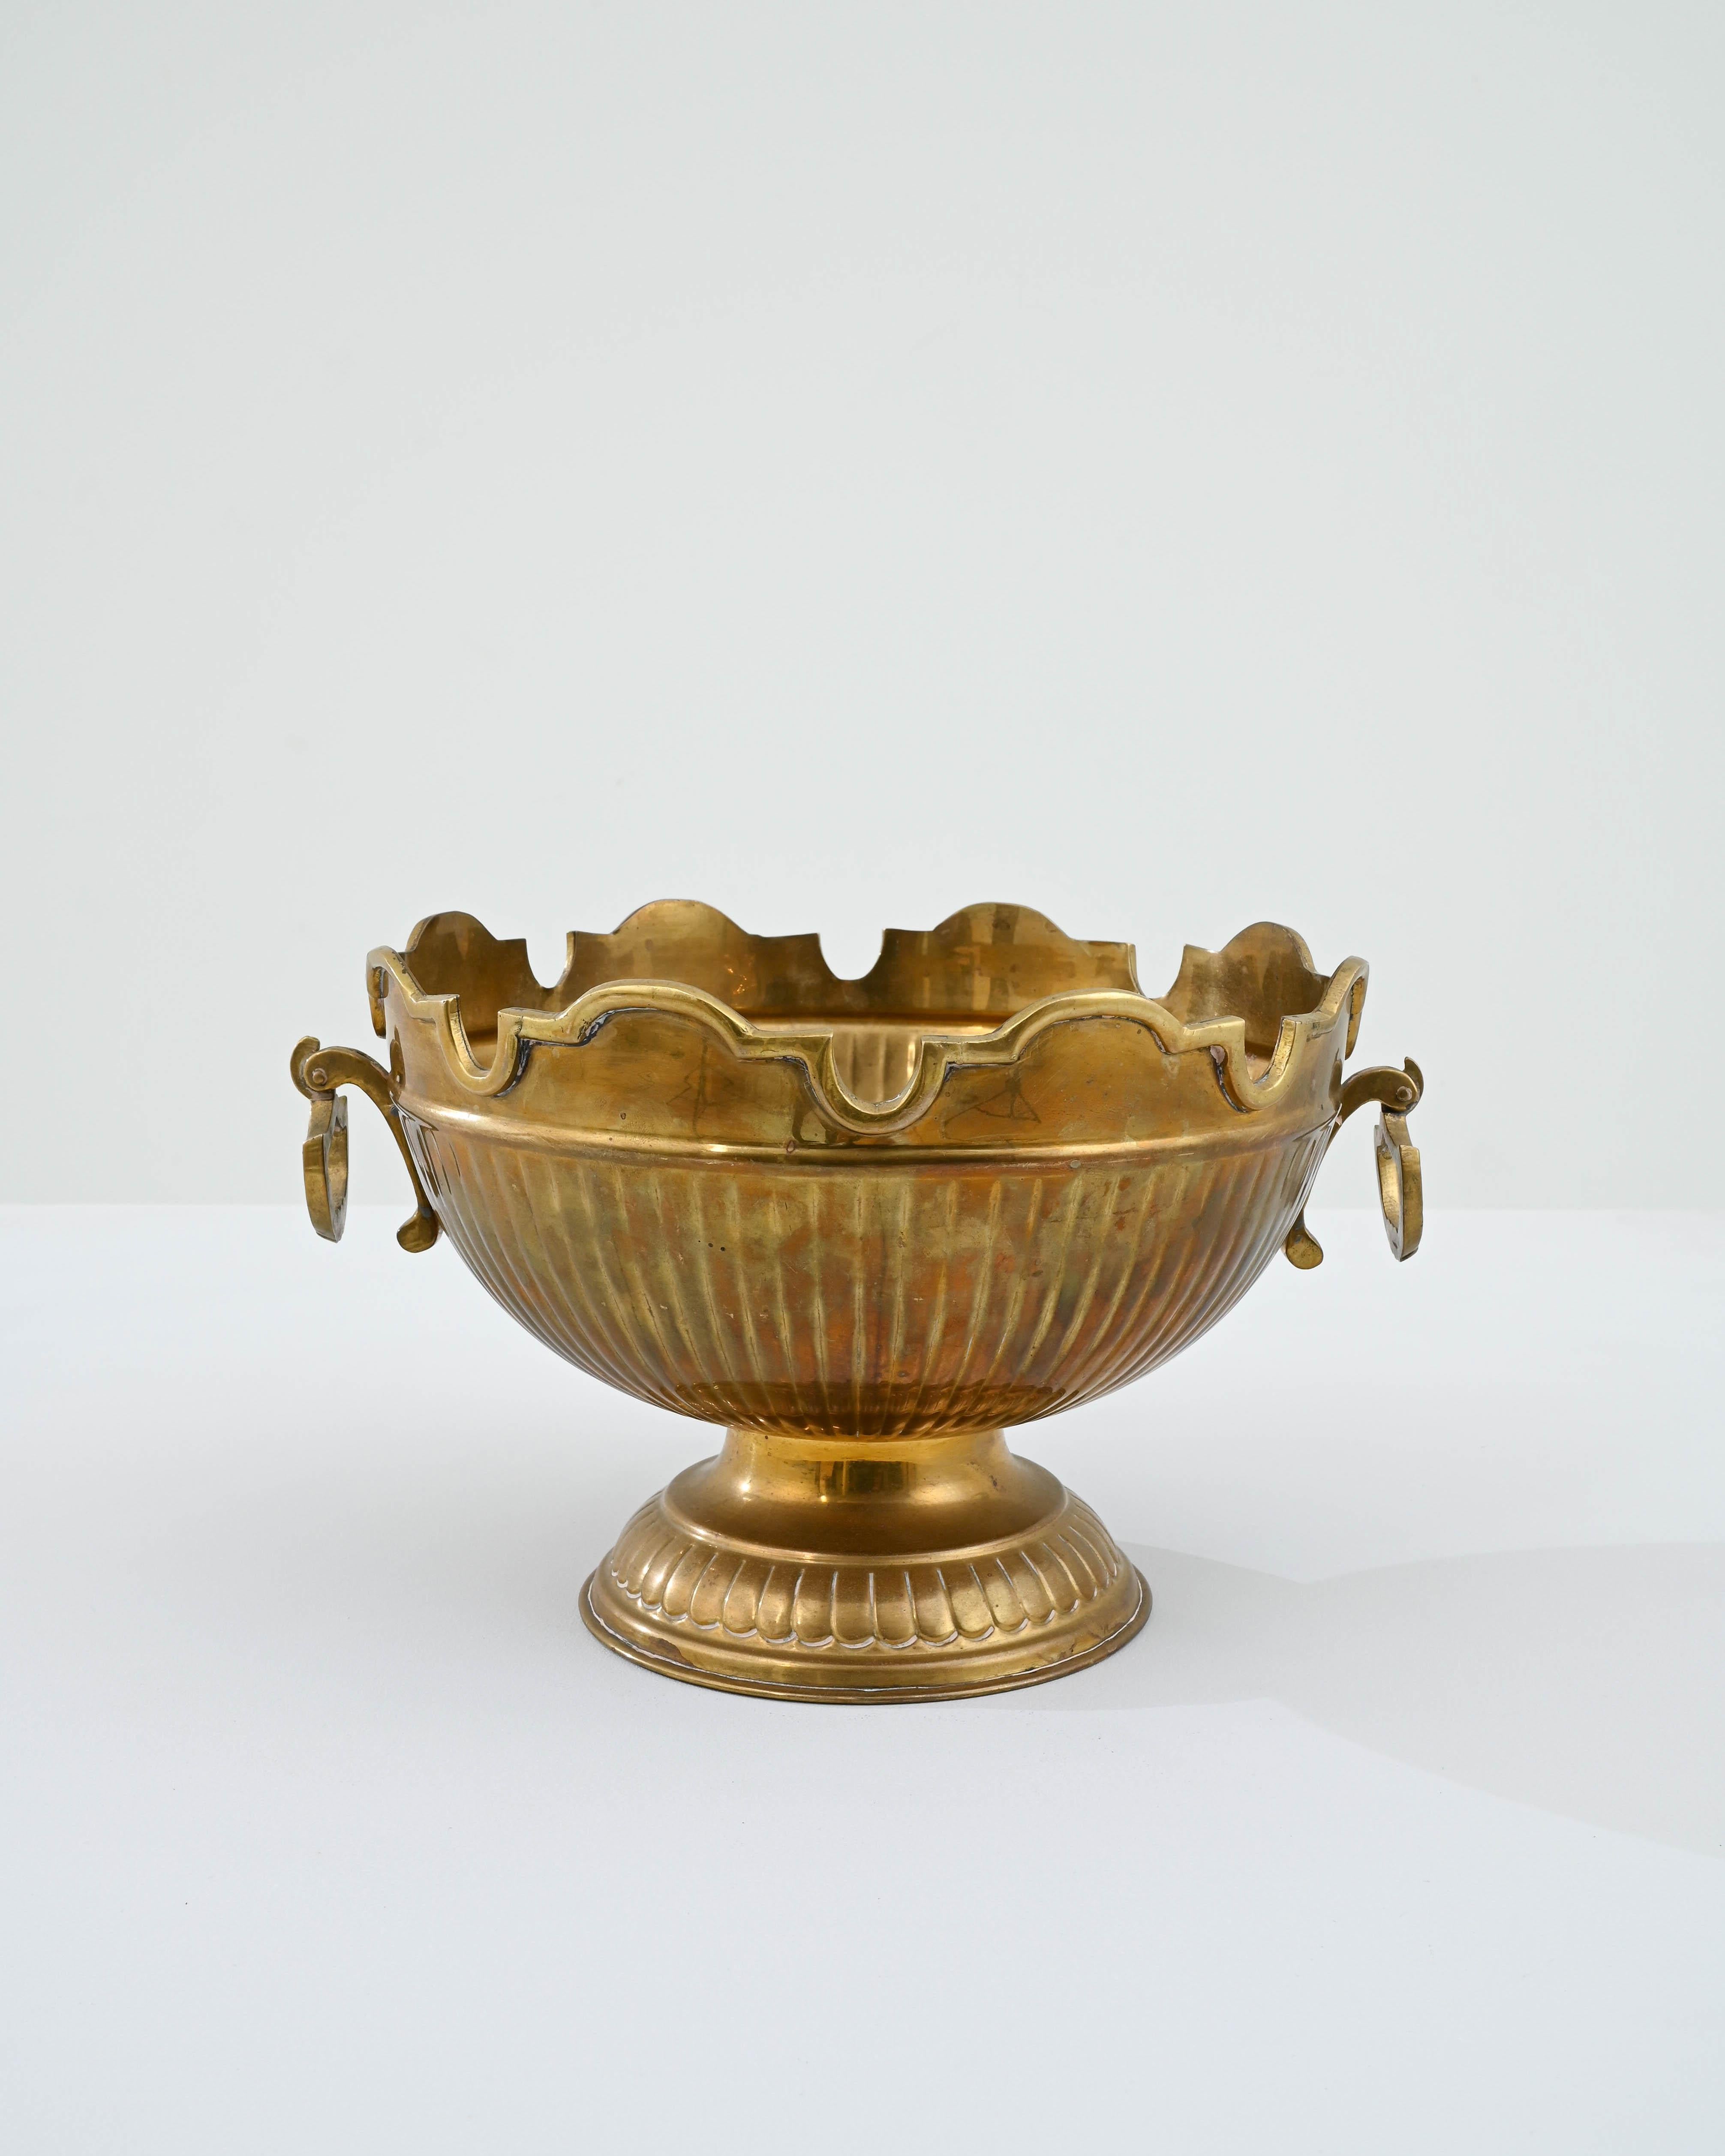 A metal ice bucket created in 20th century France. With gracefully sculpted handles and a pleasantly designed upper ring, this dignified bowl possesses an air of kingly regality. The delicately patterned exterior walls of the bowl shimmer and behold